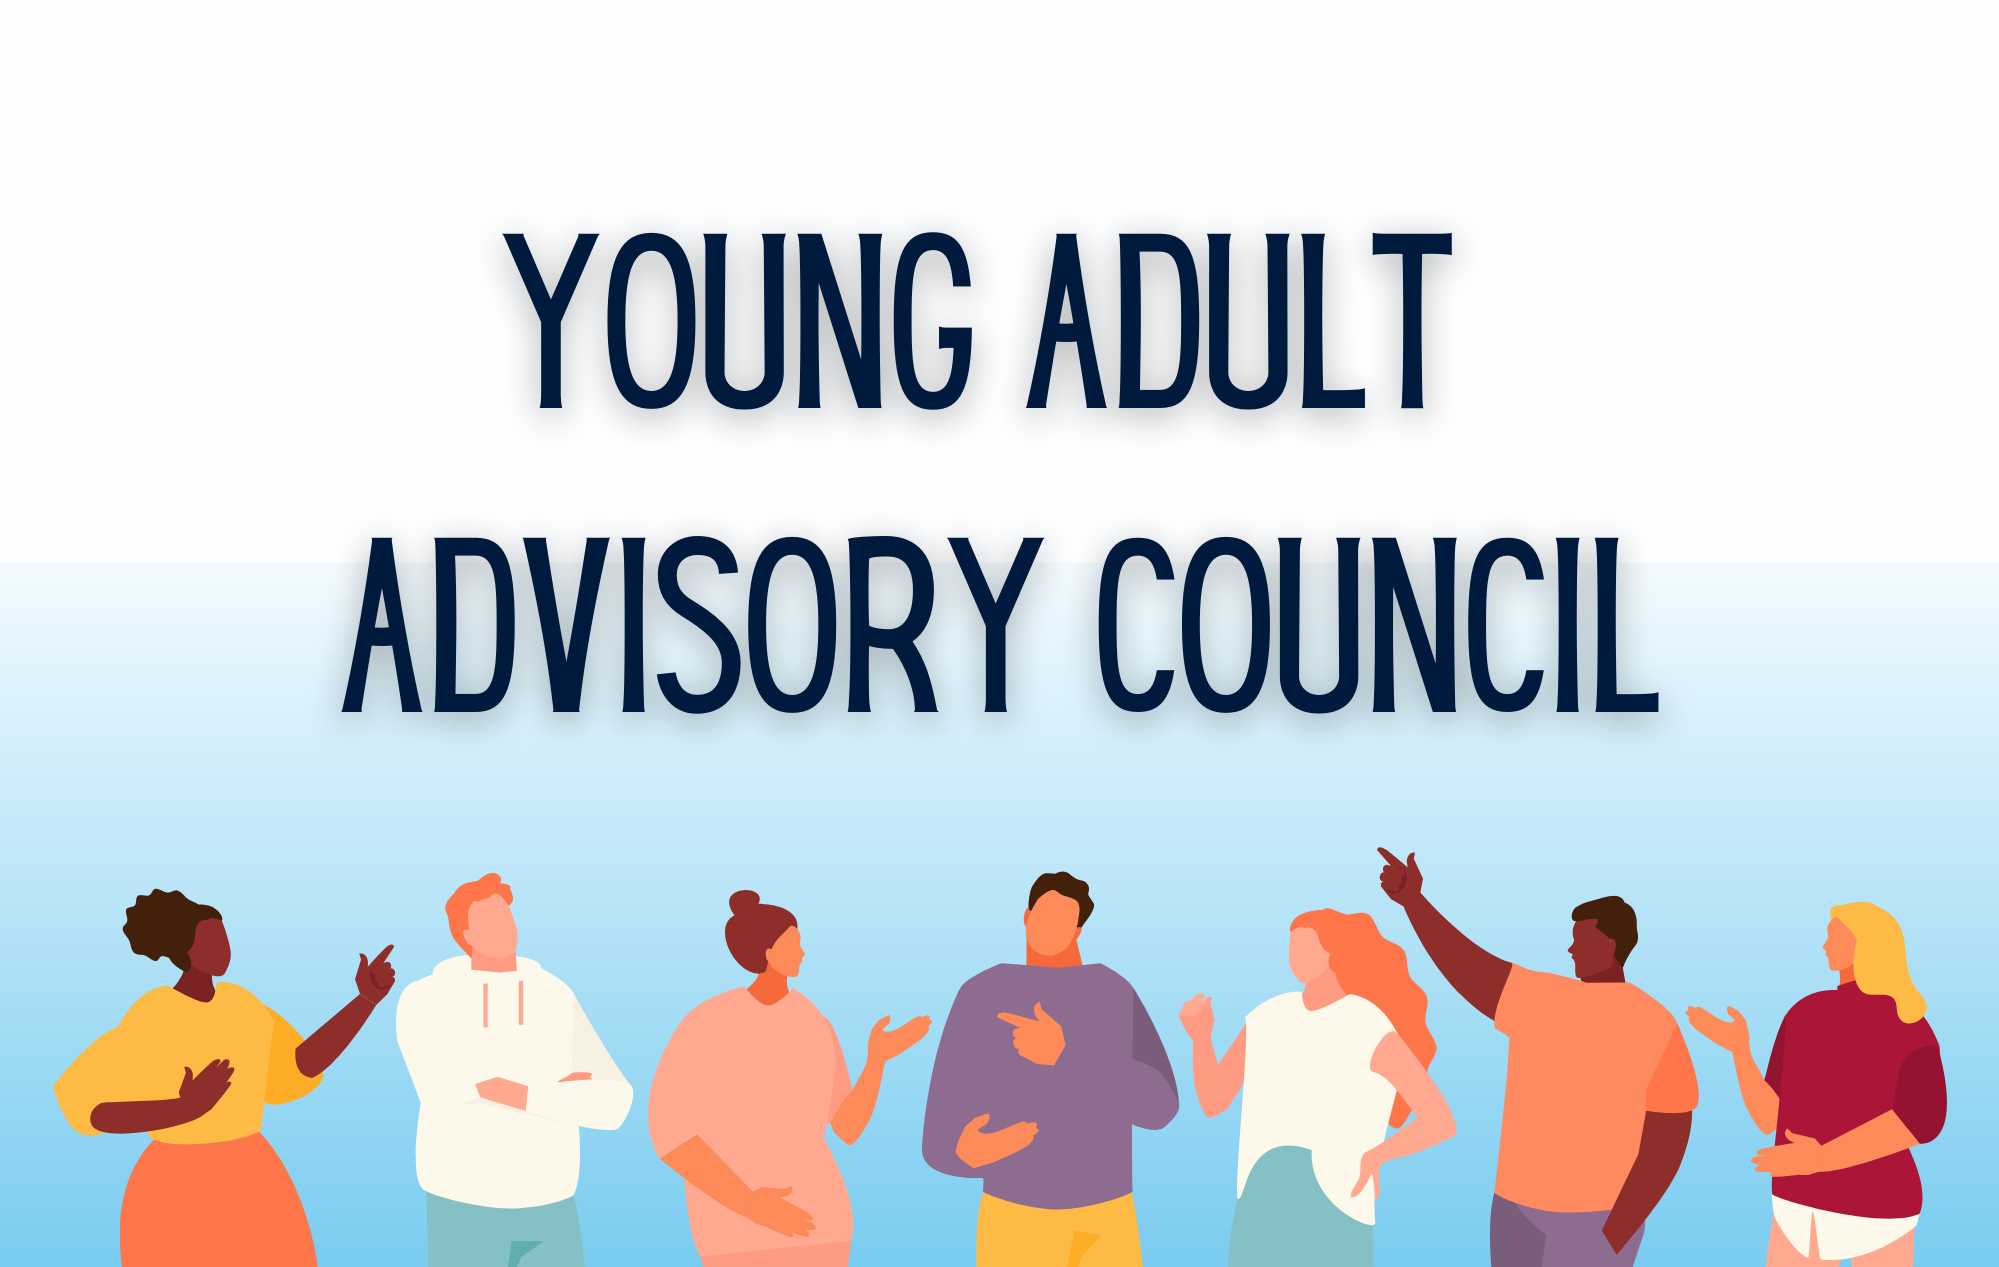 Graphic depicting clip art of young people discussion underneath the text "Young Adult Advisory Council" 